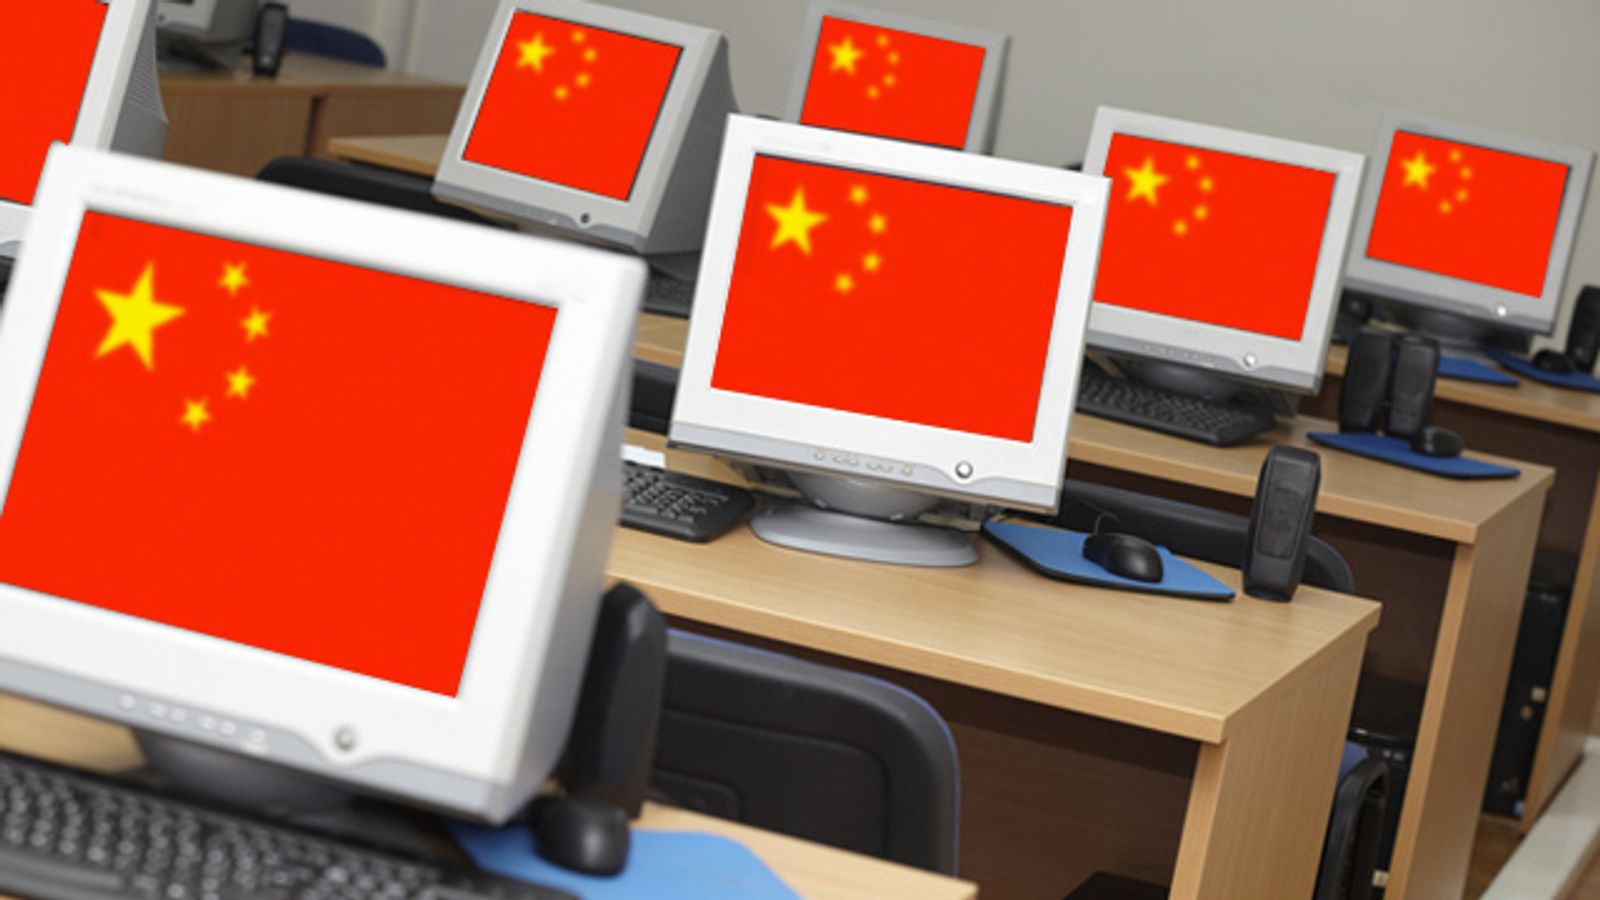 China Targets Schools in War Against Online Lewdness